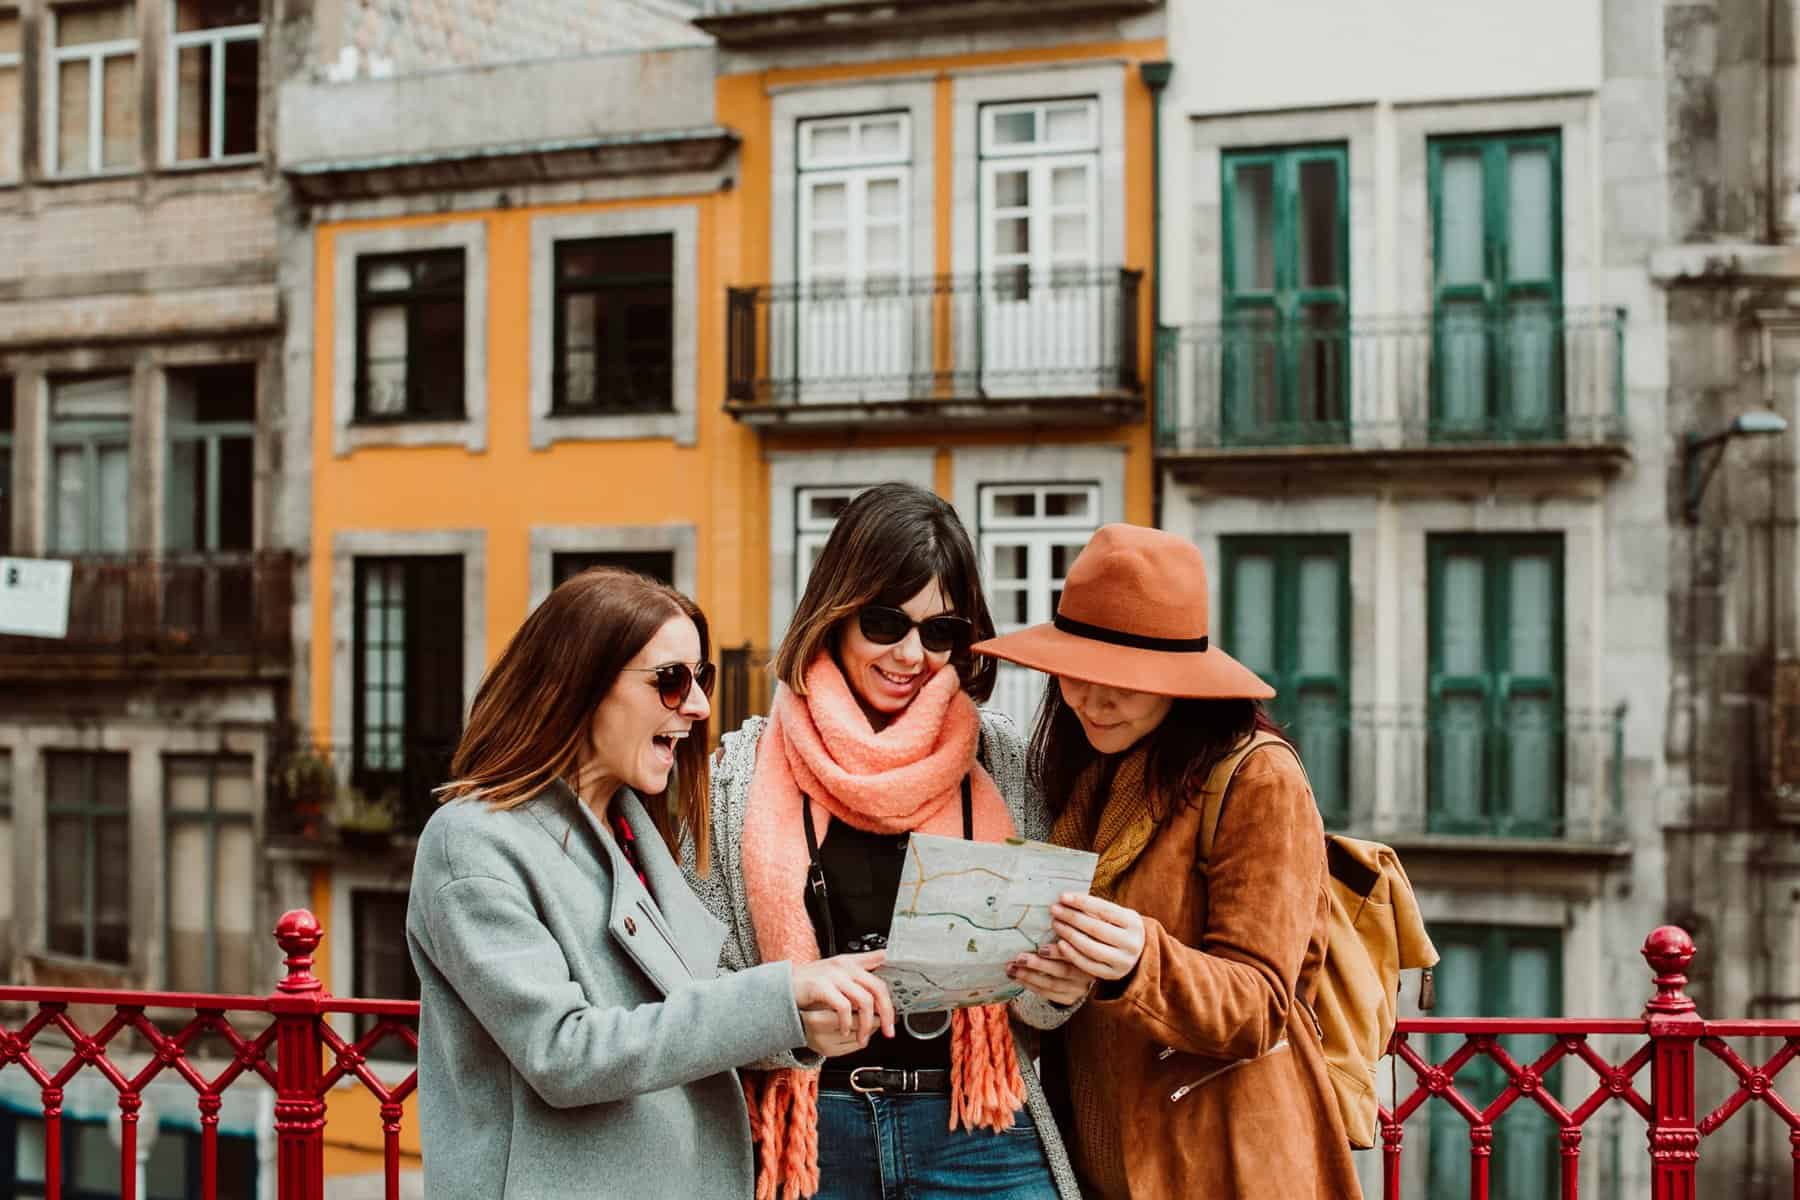 A group of woman outside consulting a map. They look happy.